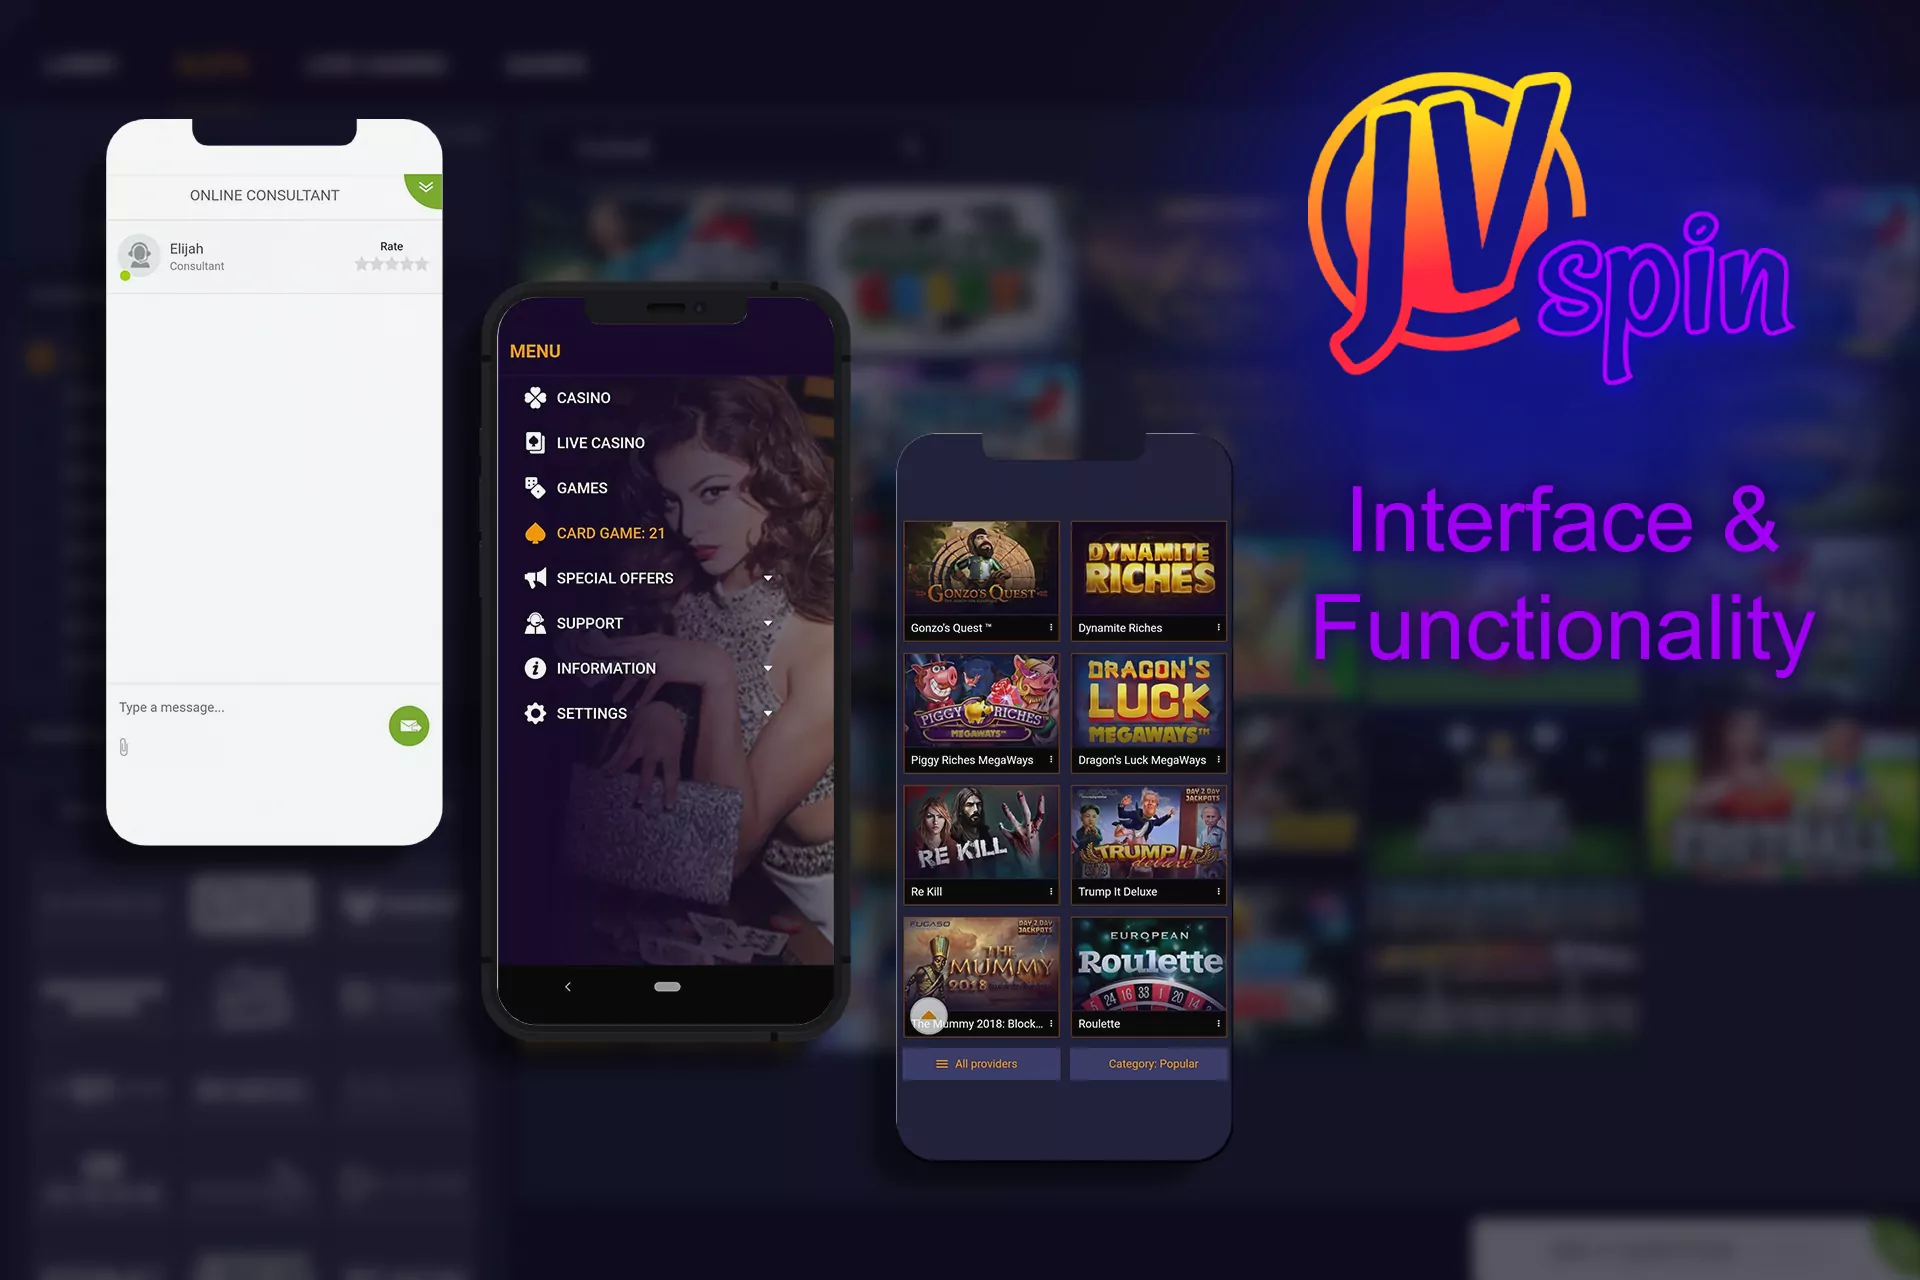 The JVSpin app has lots of functions that make playing slots more comfortable than through the browser version.